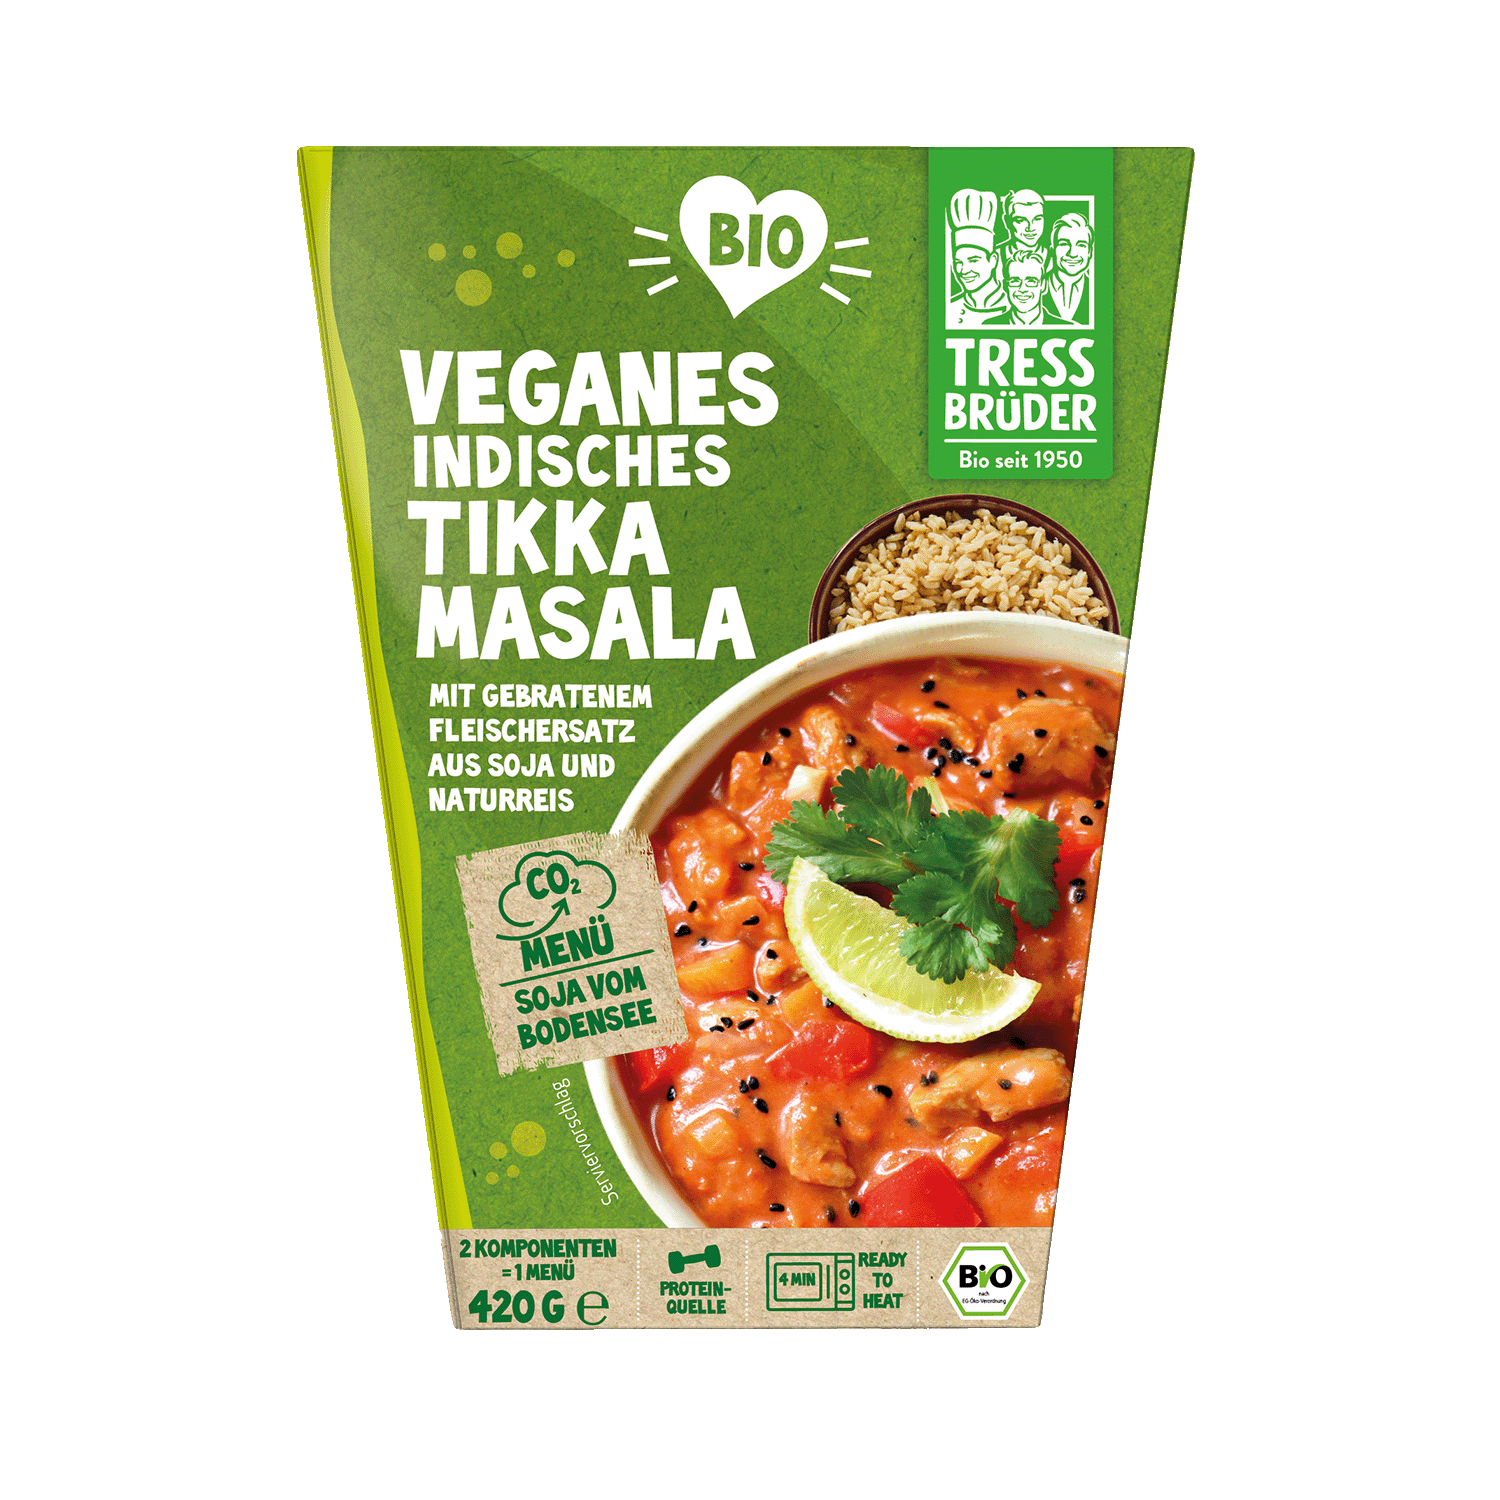 Vegan Indian tikka masala with meat substitute with brown rice, Organic, 420g